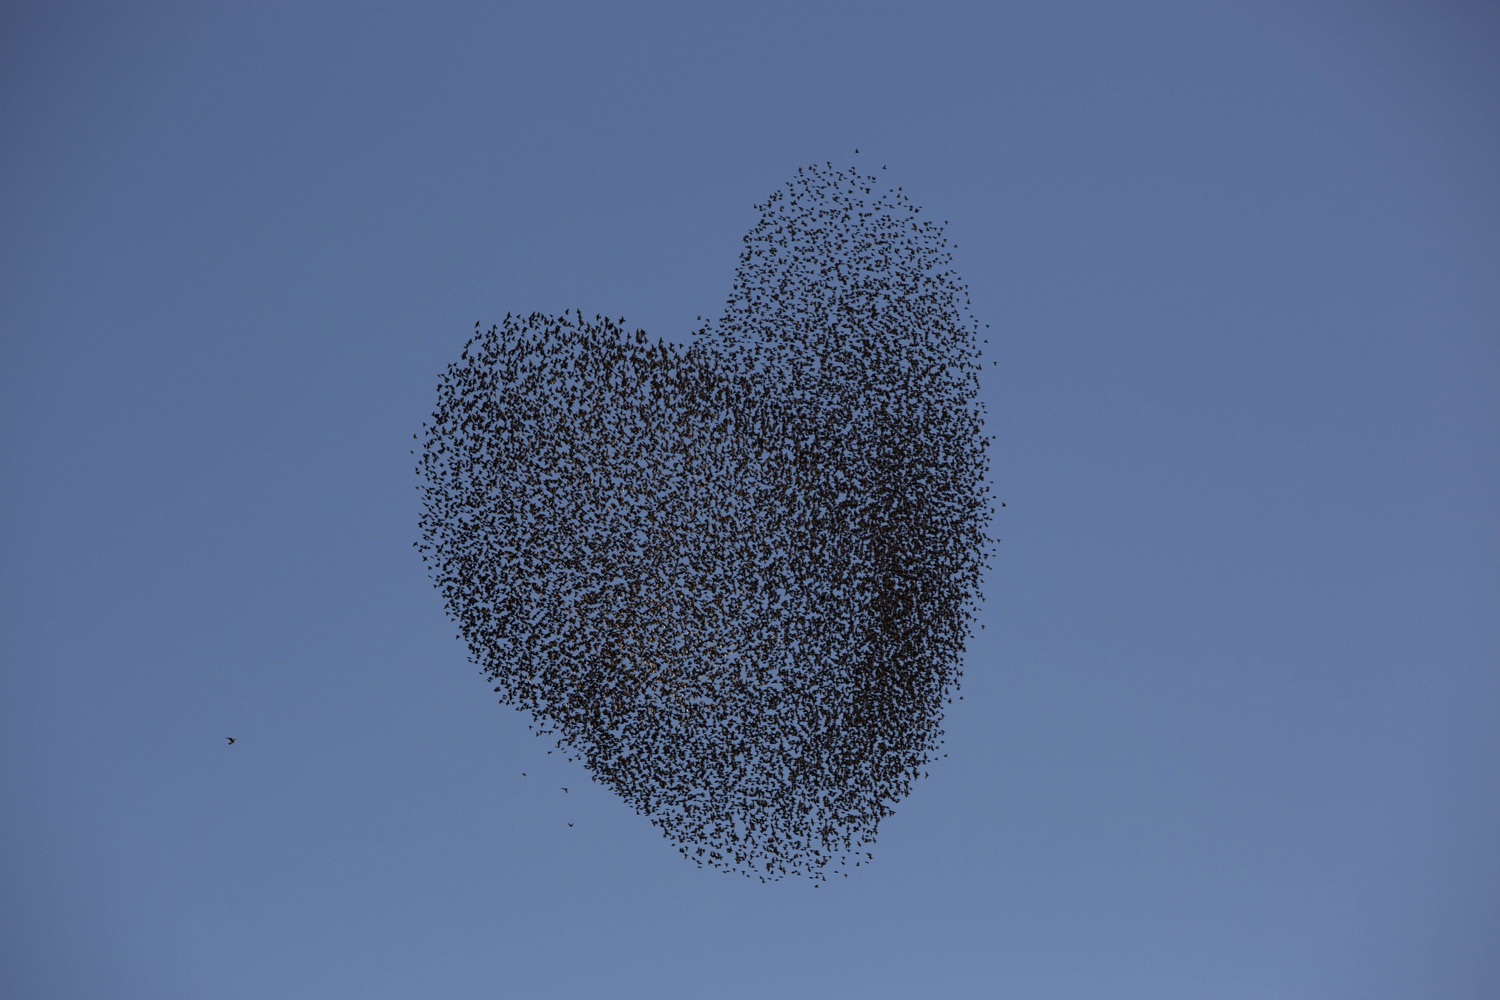 Feb. 12, 2014. A flock of migrating starlings flies over the southern Israeli village of Tidhar.